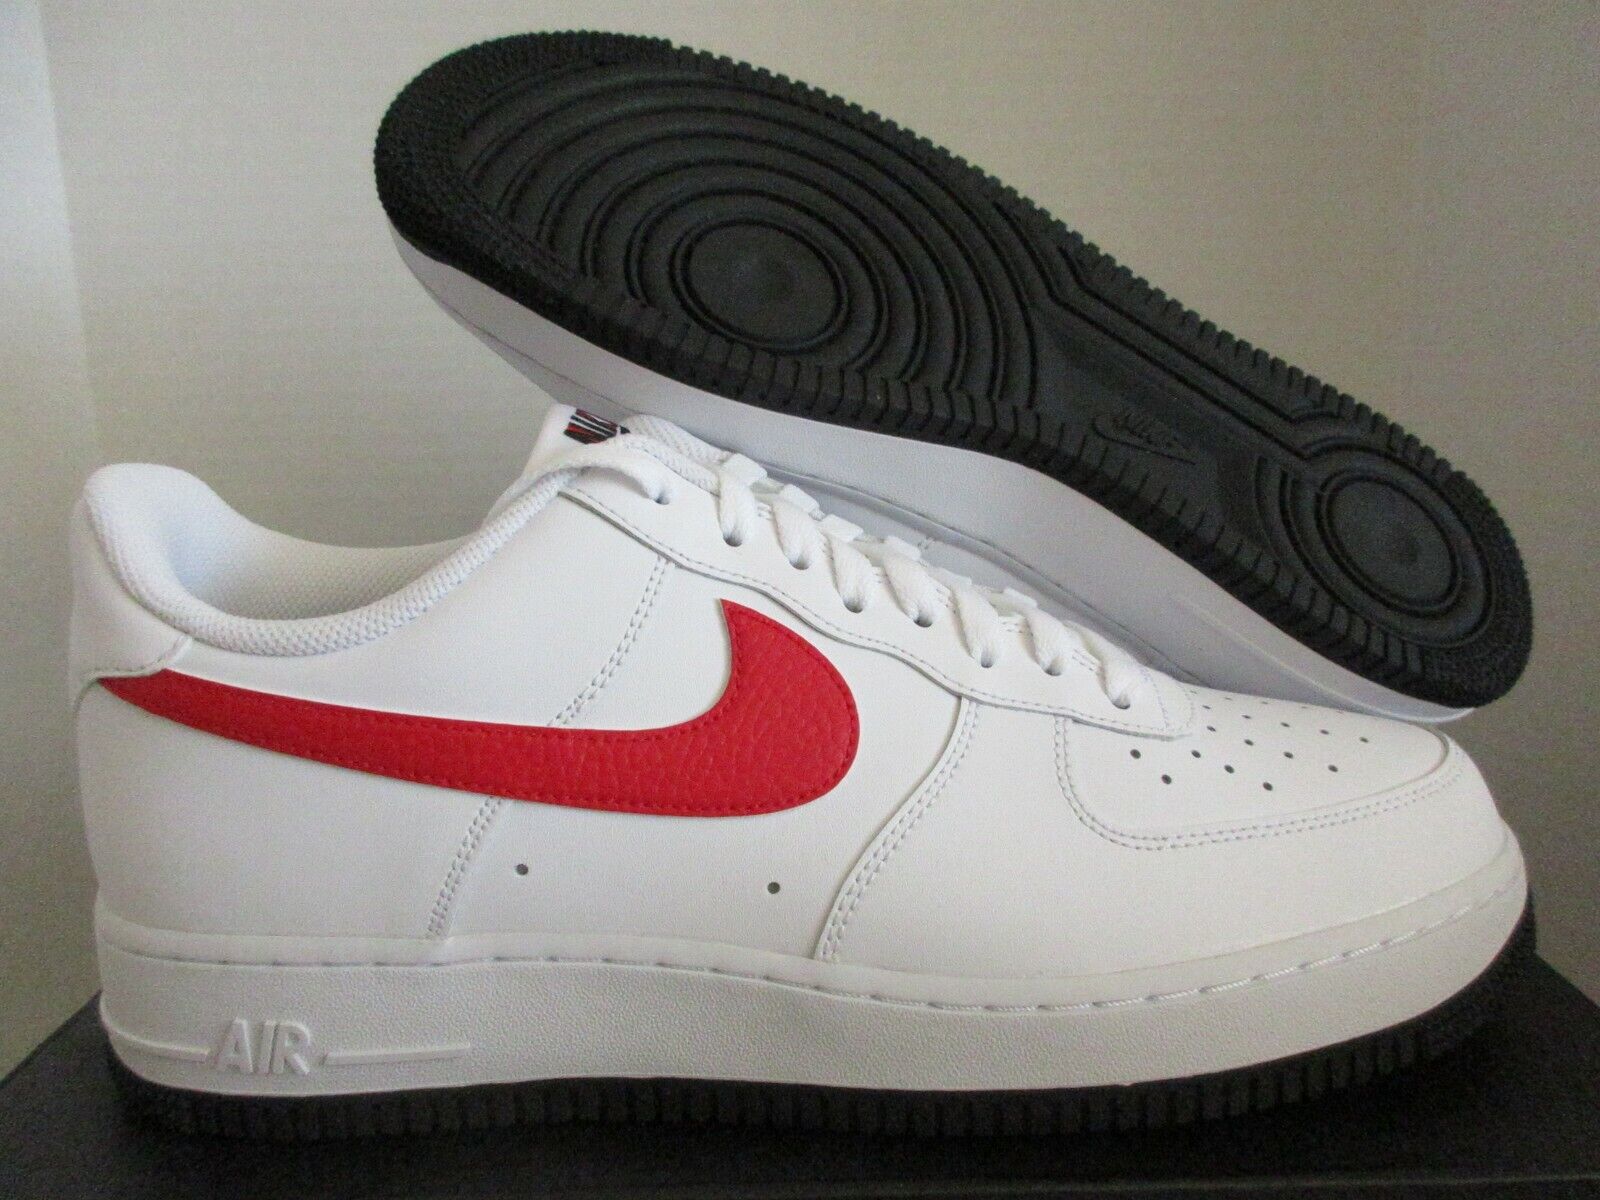 NIKE AIR FORCE 1 07 WHITE-UNIVERSITY RED SZ 11 [CT2816-100]